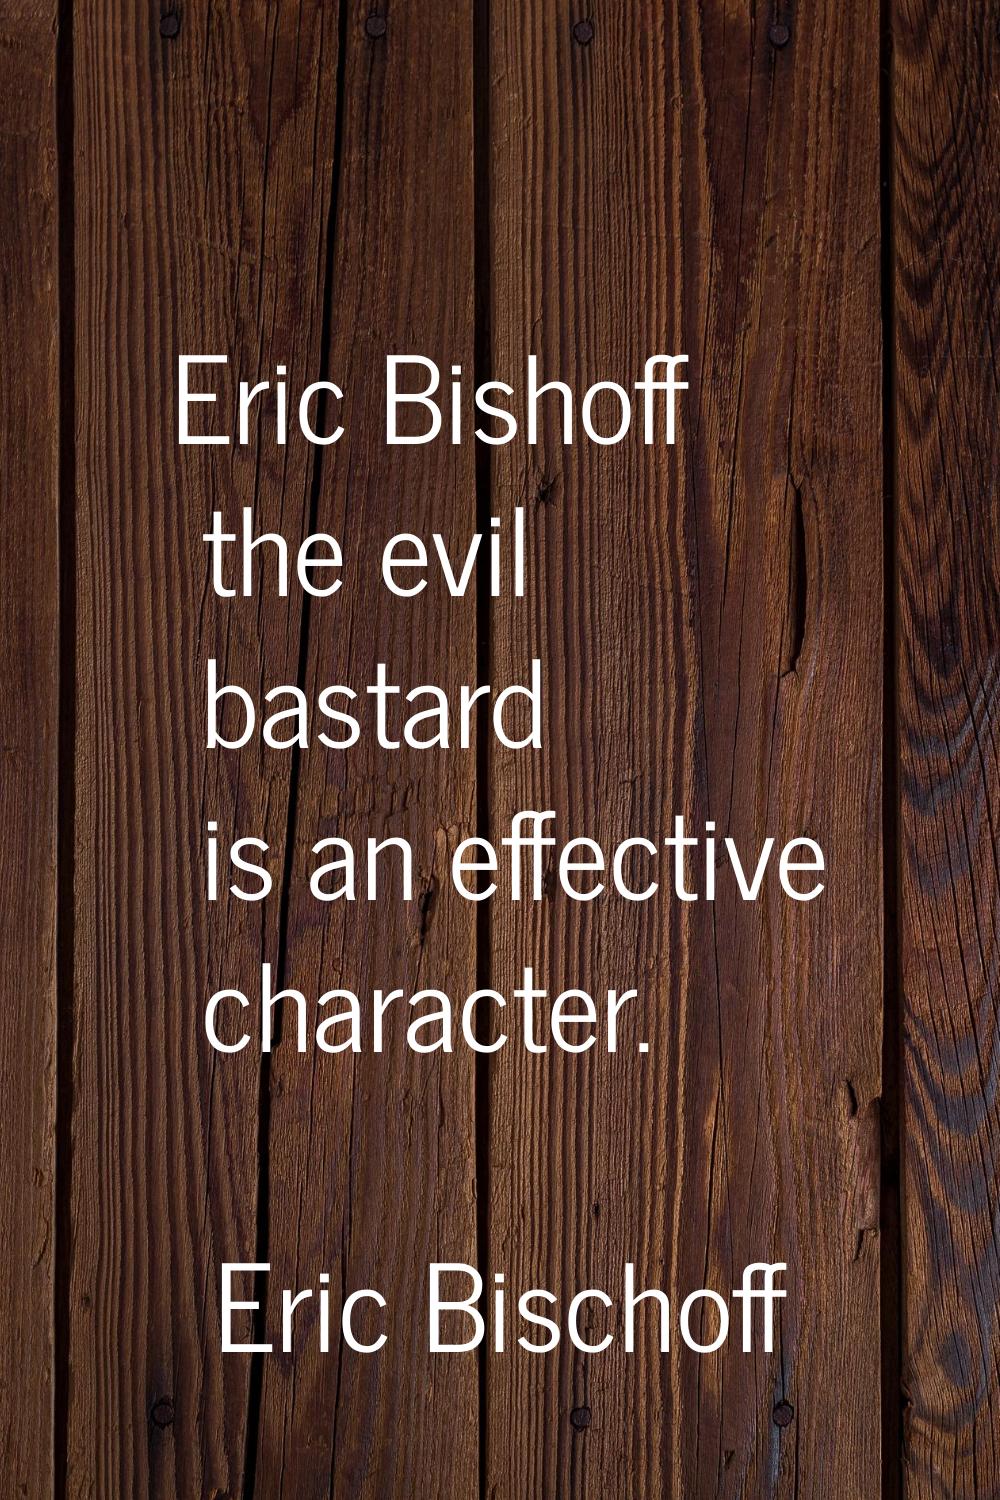 Eric Bishoff the evil bastard is an effective character.